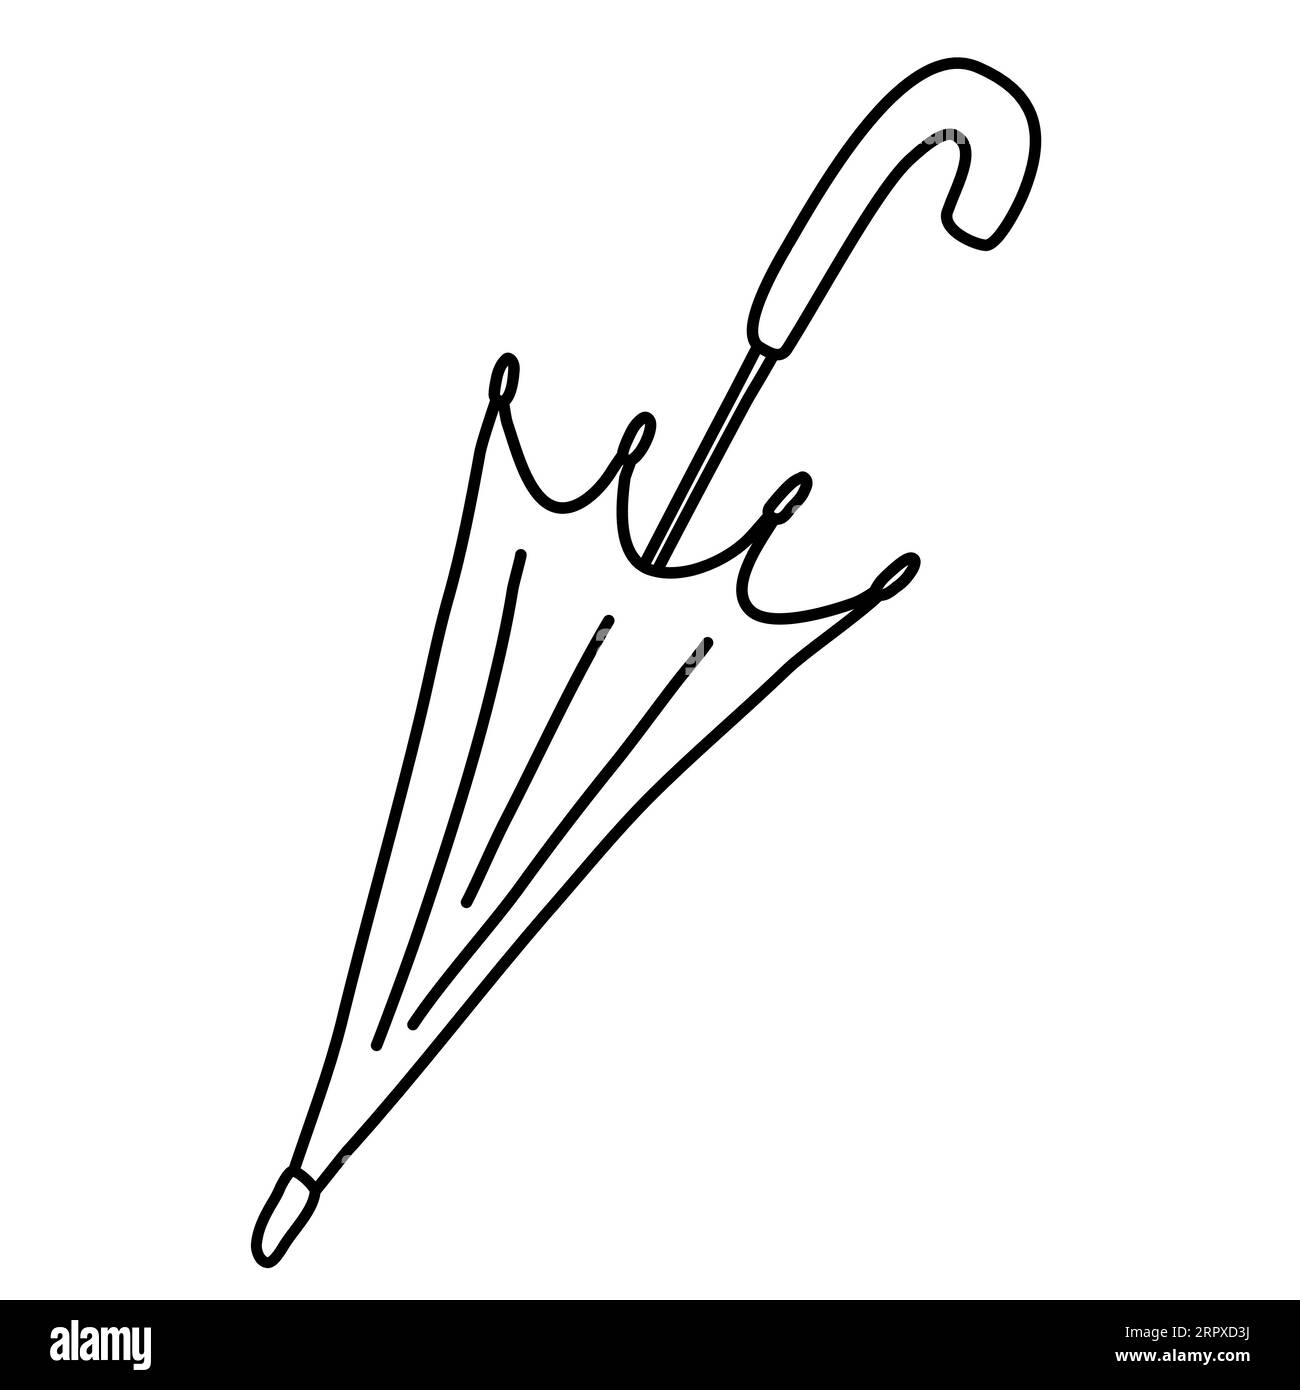 Folded umbrella, rain protection accessory, doodle style flat vector outline illustration for kids coloring book Stock Vector